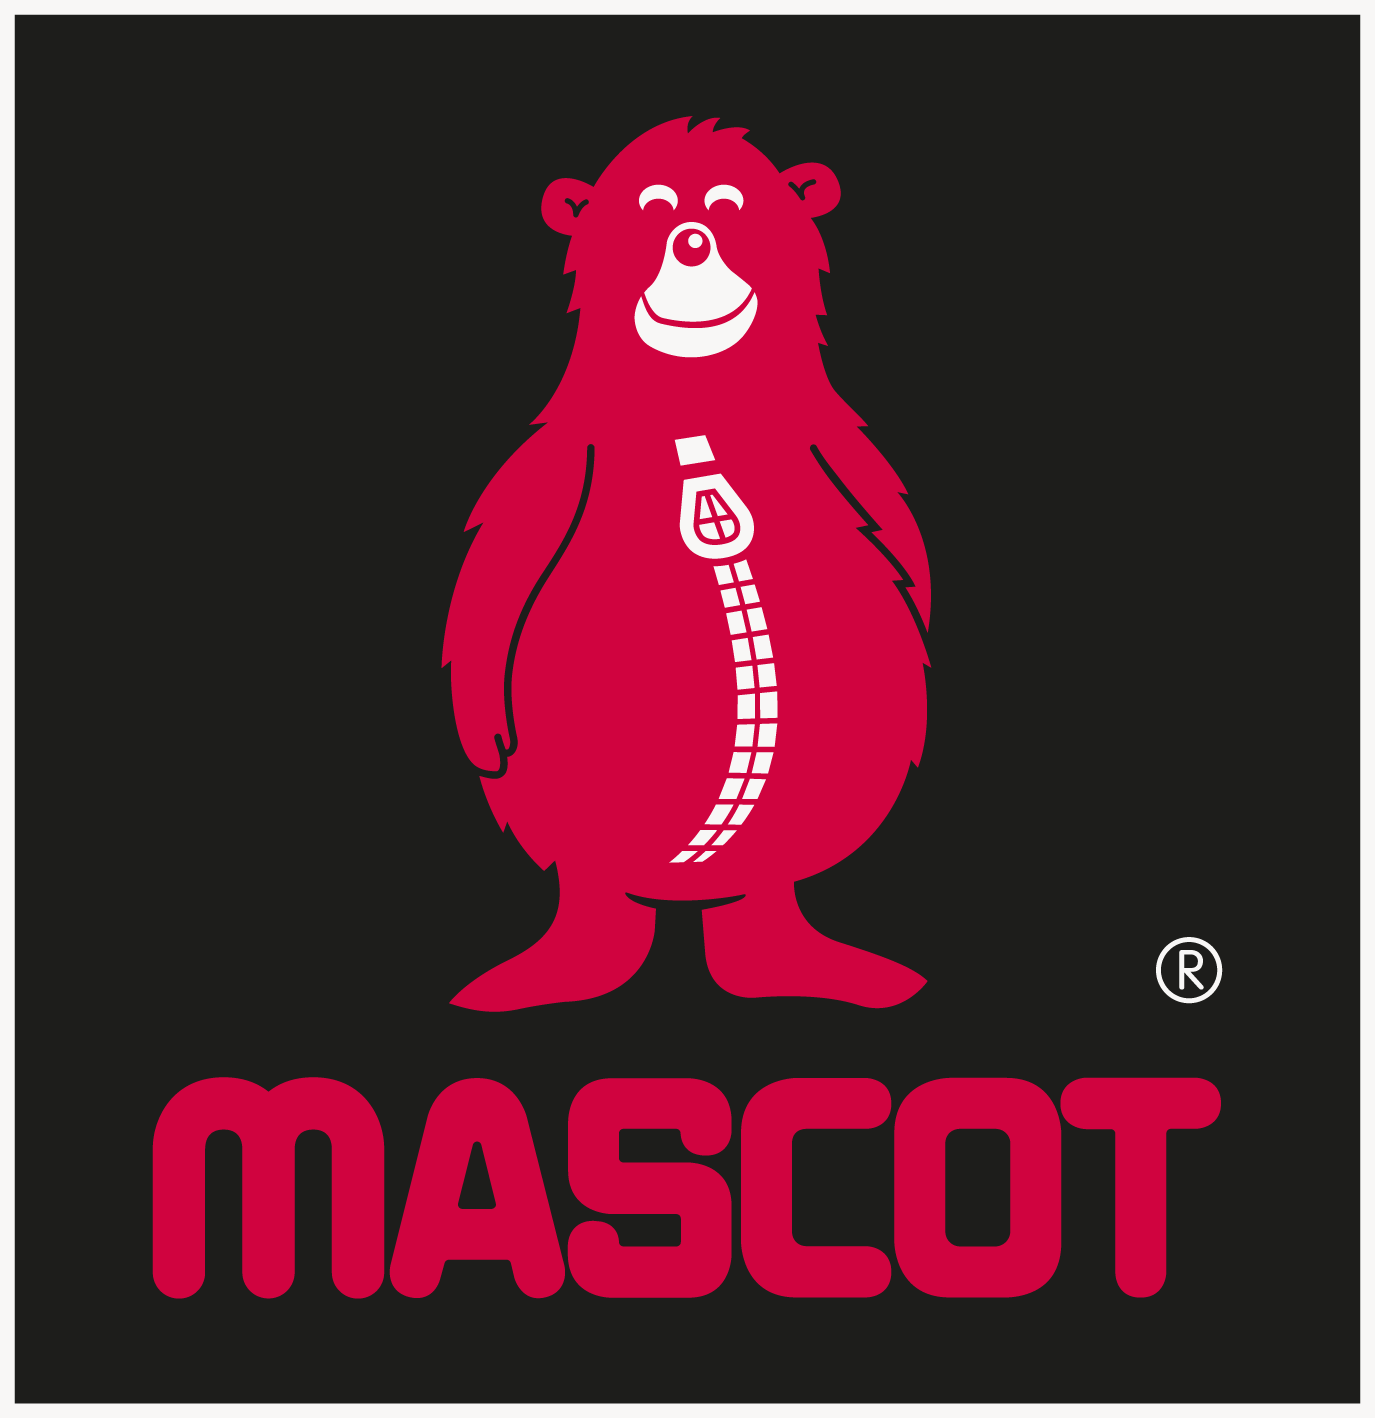 Mascot - tested to work